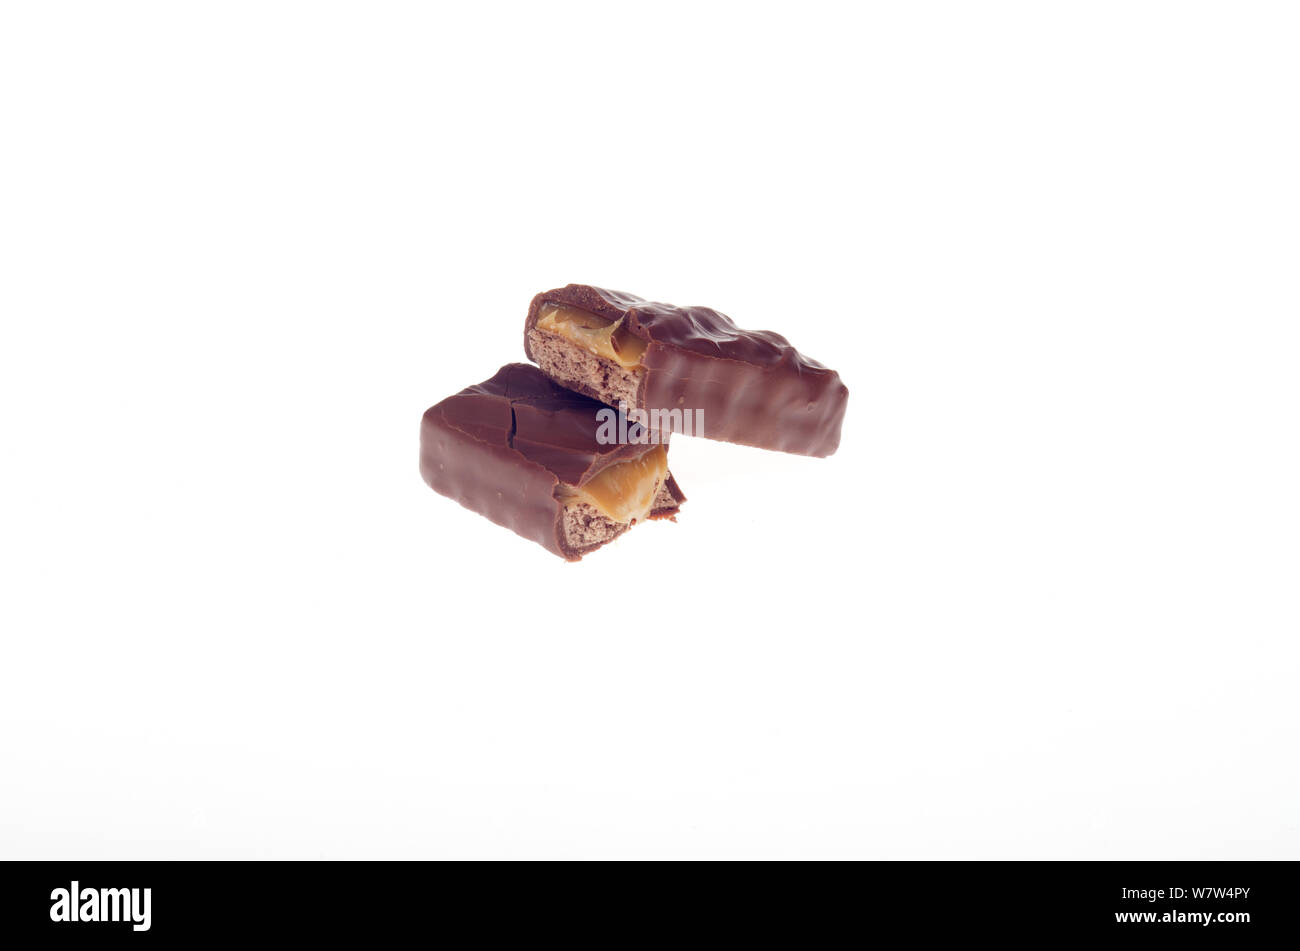 Milky Way candy bar broken in half showing filling without wrapper Stock Photo